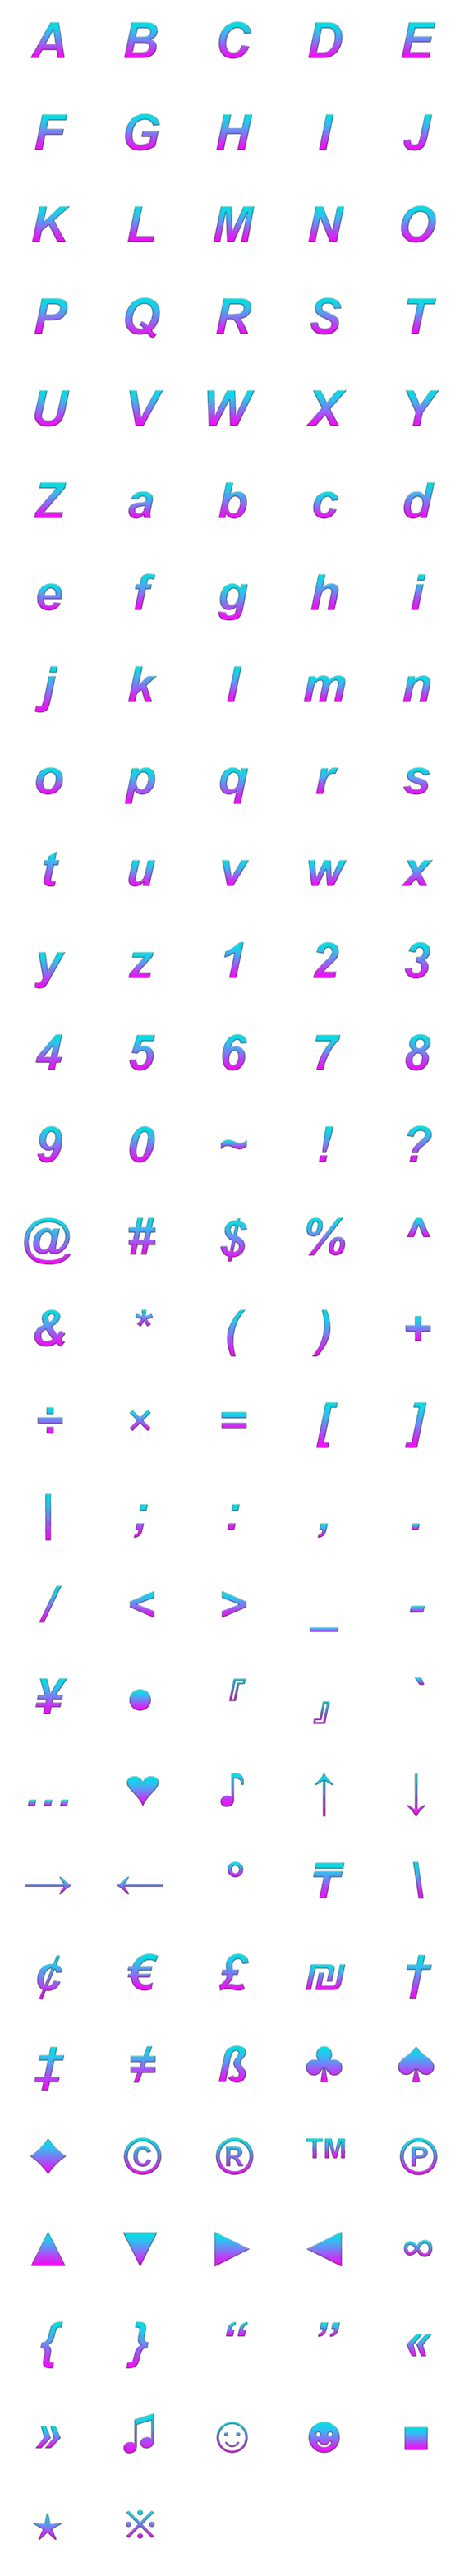 [LINE絵文字]Vaporwave Aesthetic: Alphabets ＆ Othersの画像一覧